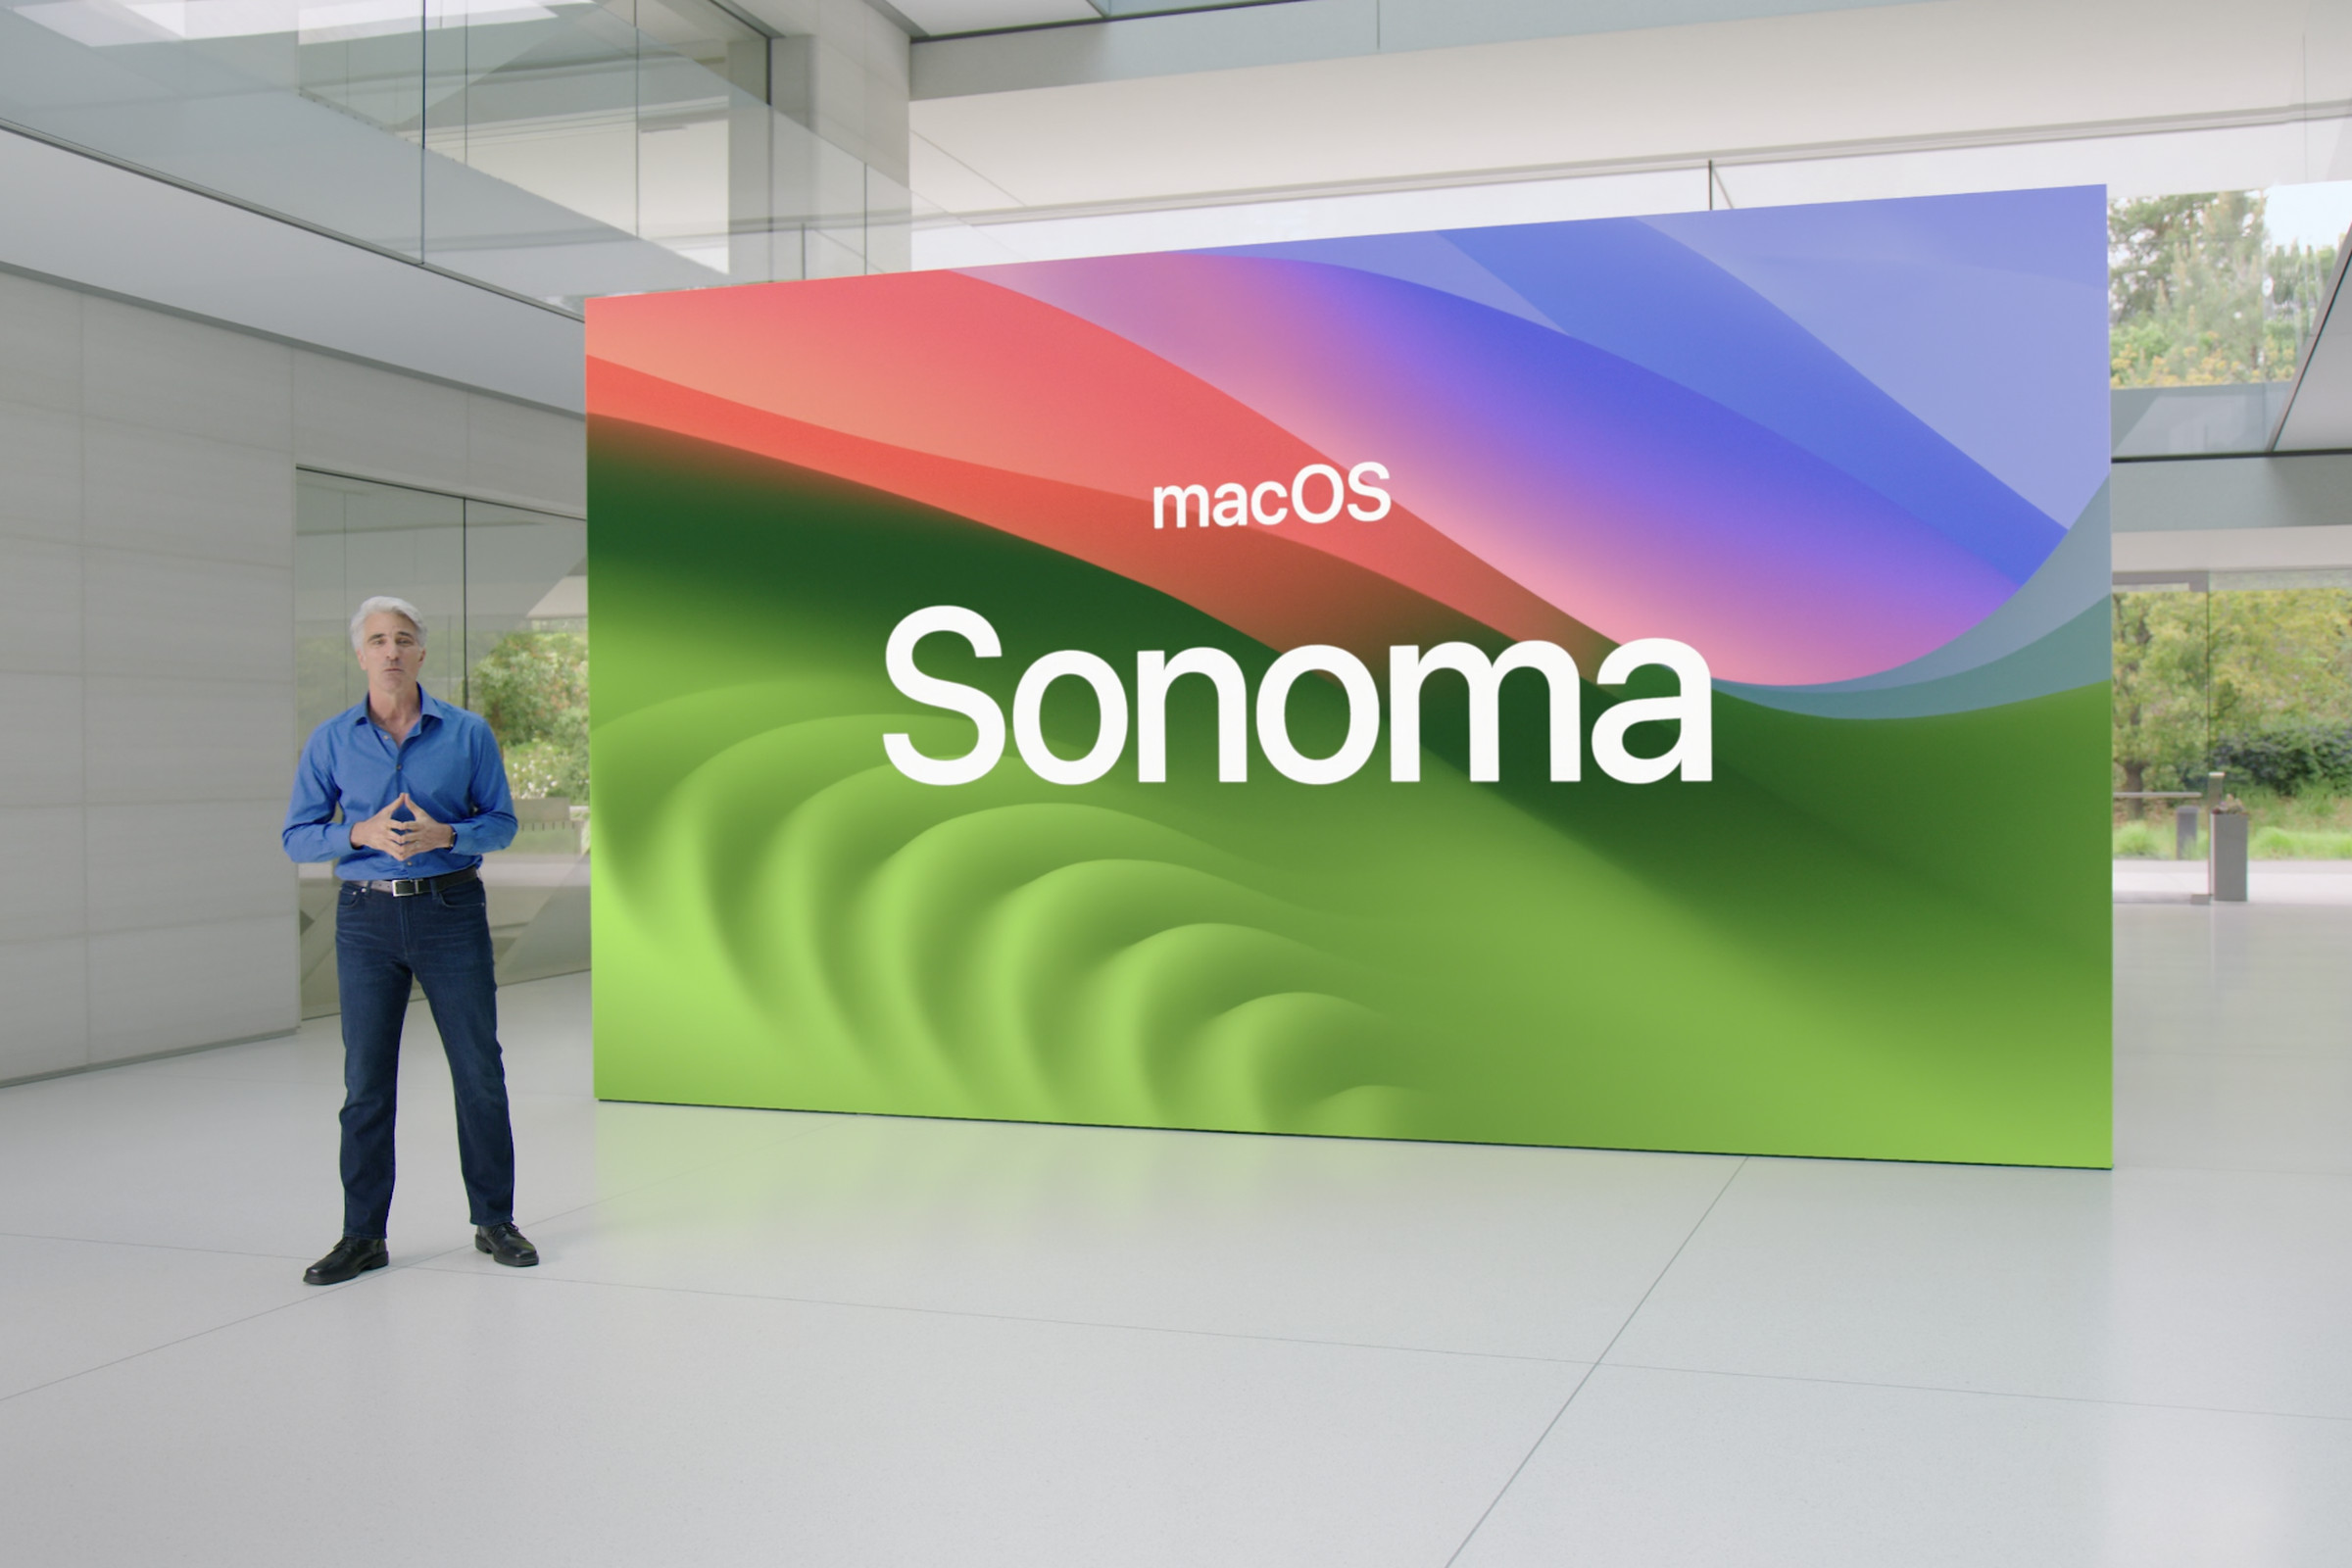 Apple executive Craig Federighi stands in front of a macOS Sonoma slide.